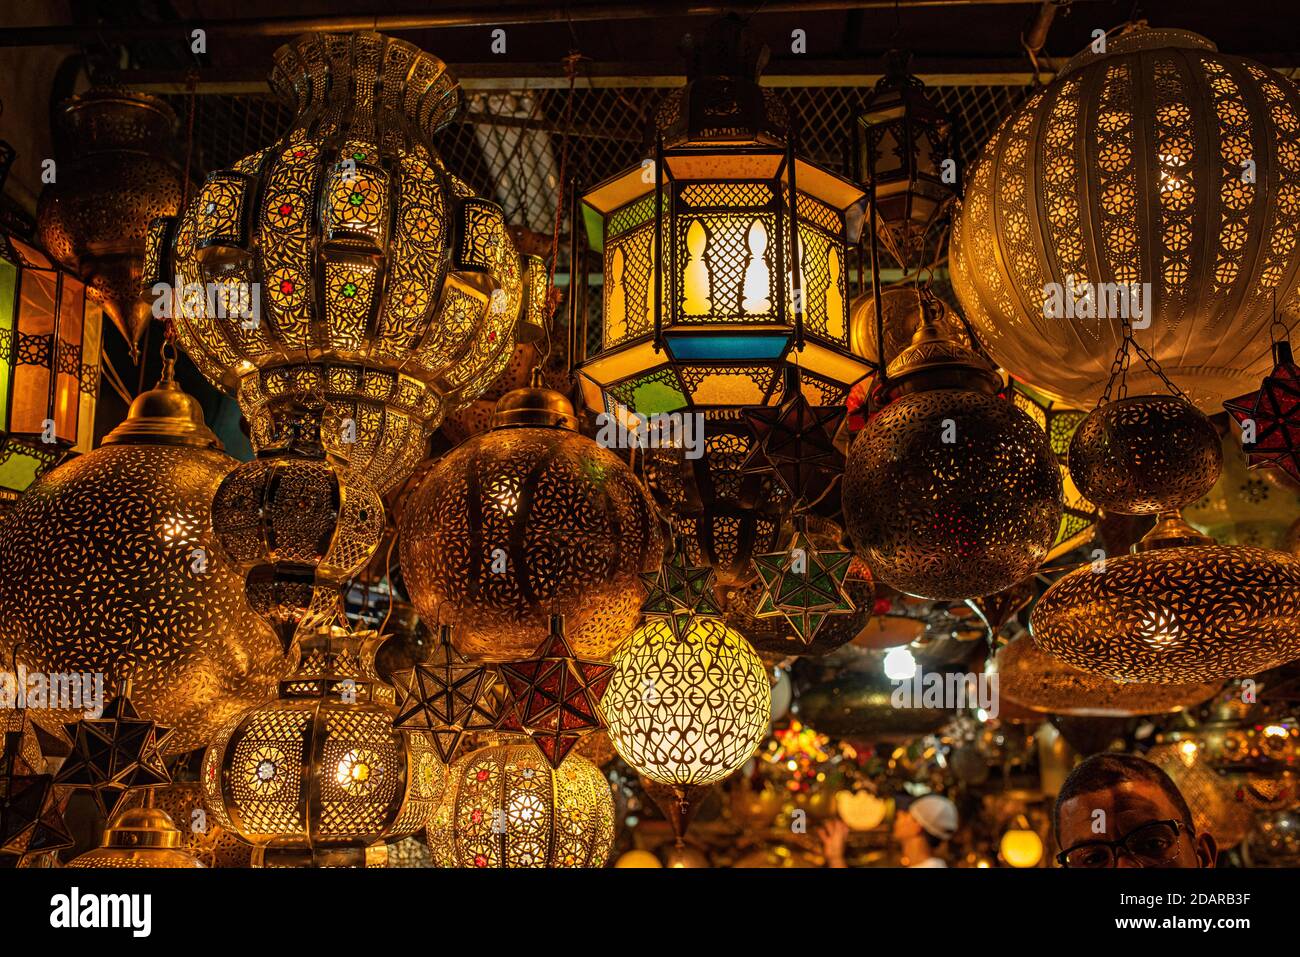 Various lamps made of brass or copper and colored glass for sale hung up, souk, bazaar, Marrakech, Morocco Stock Photo